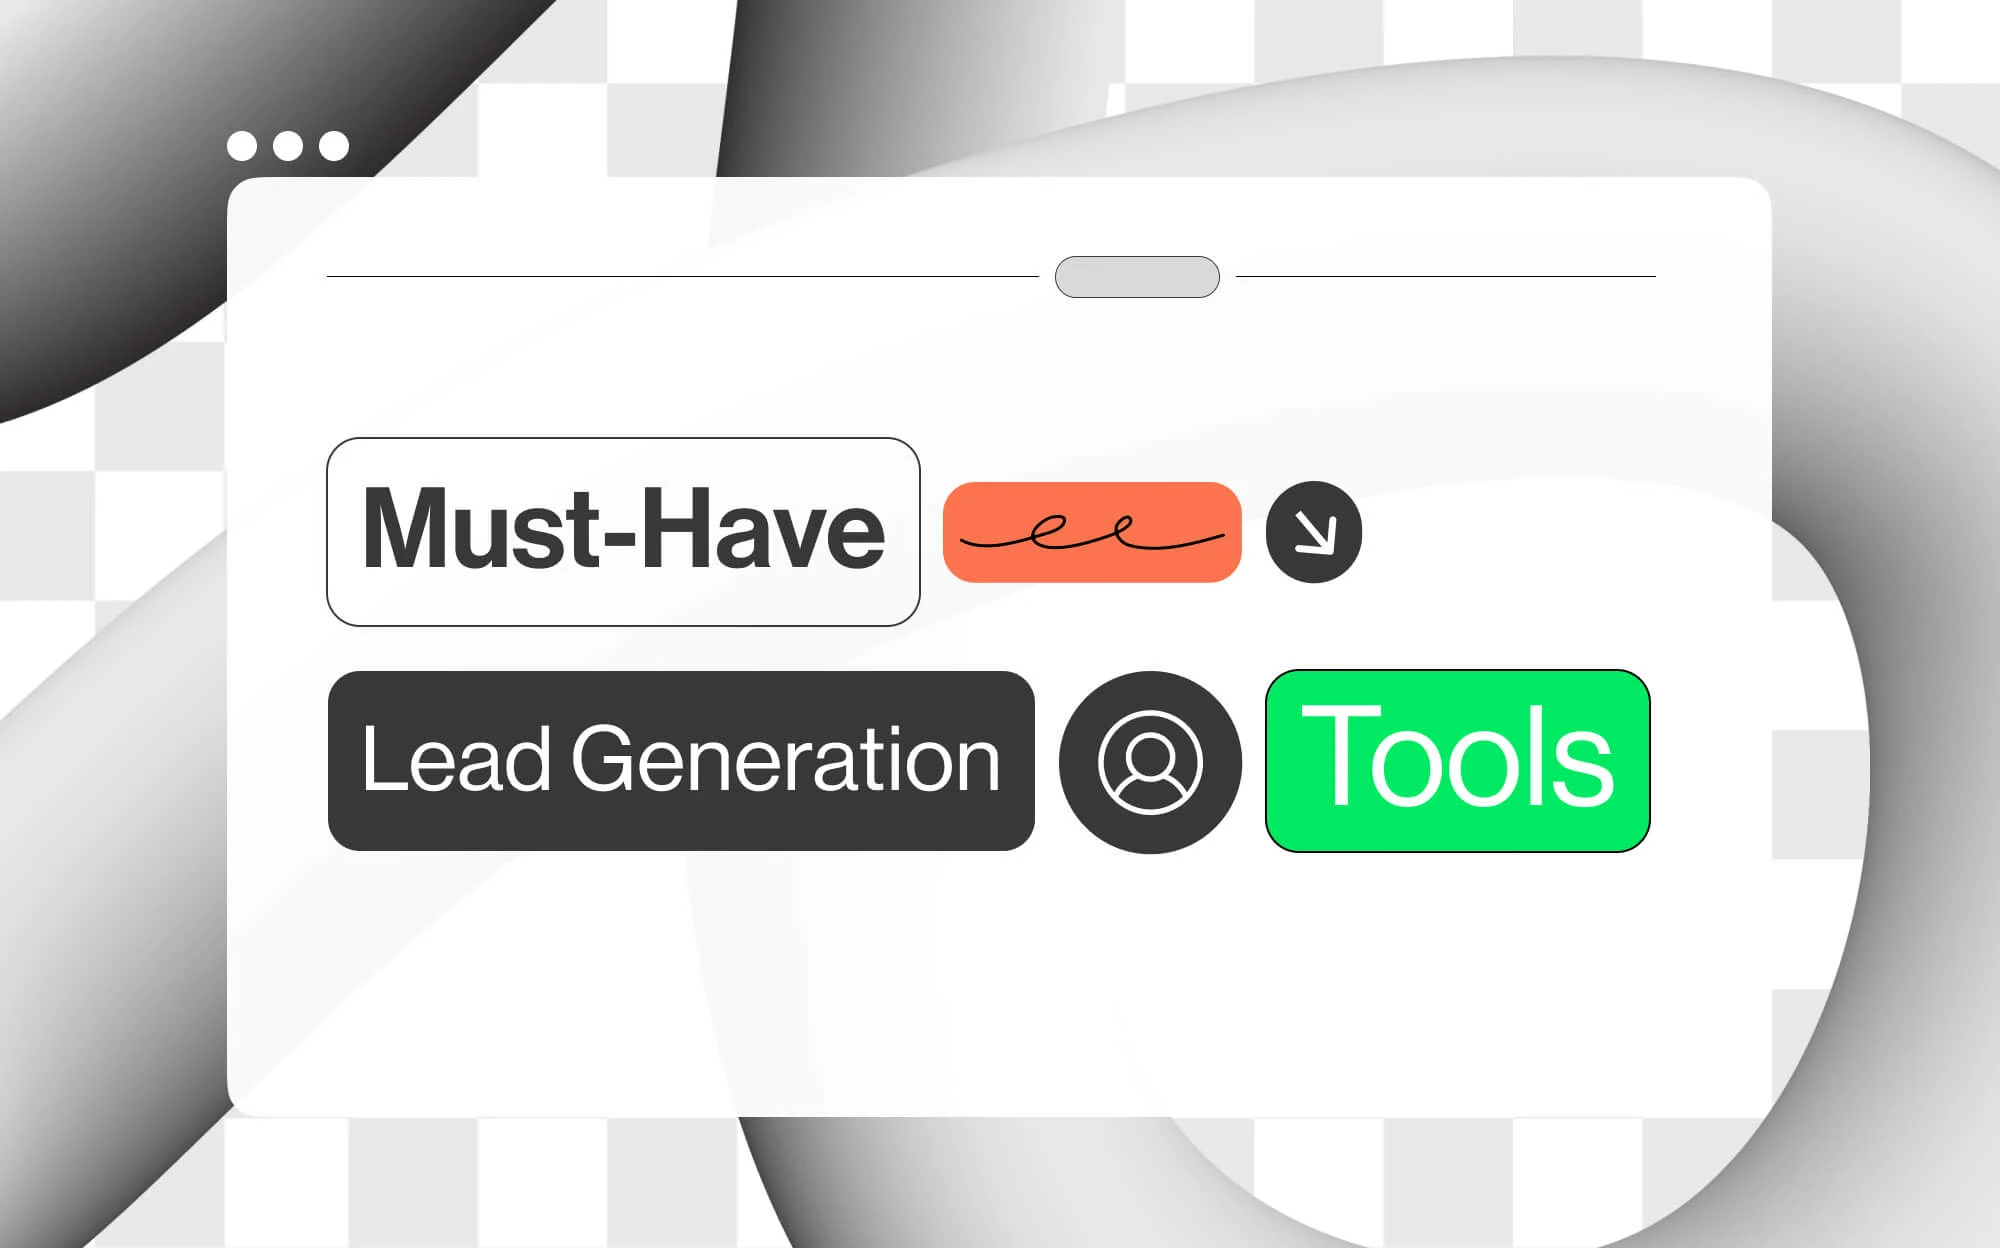 5 lead generation tools every marketer should consider